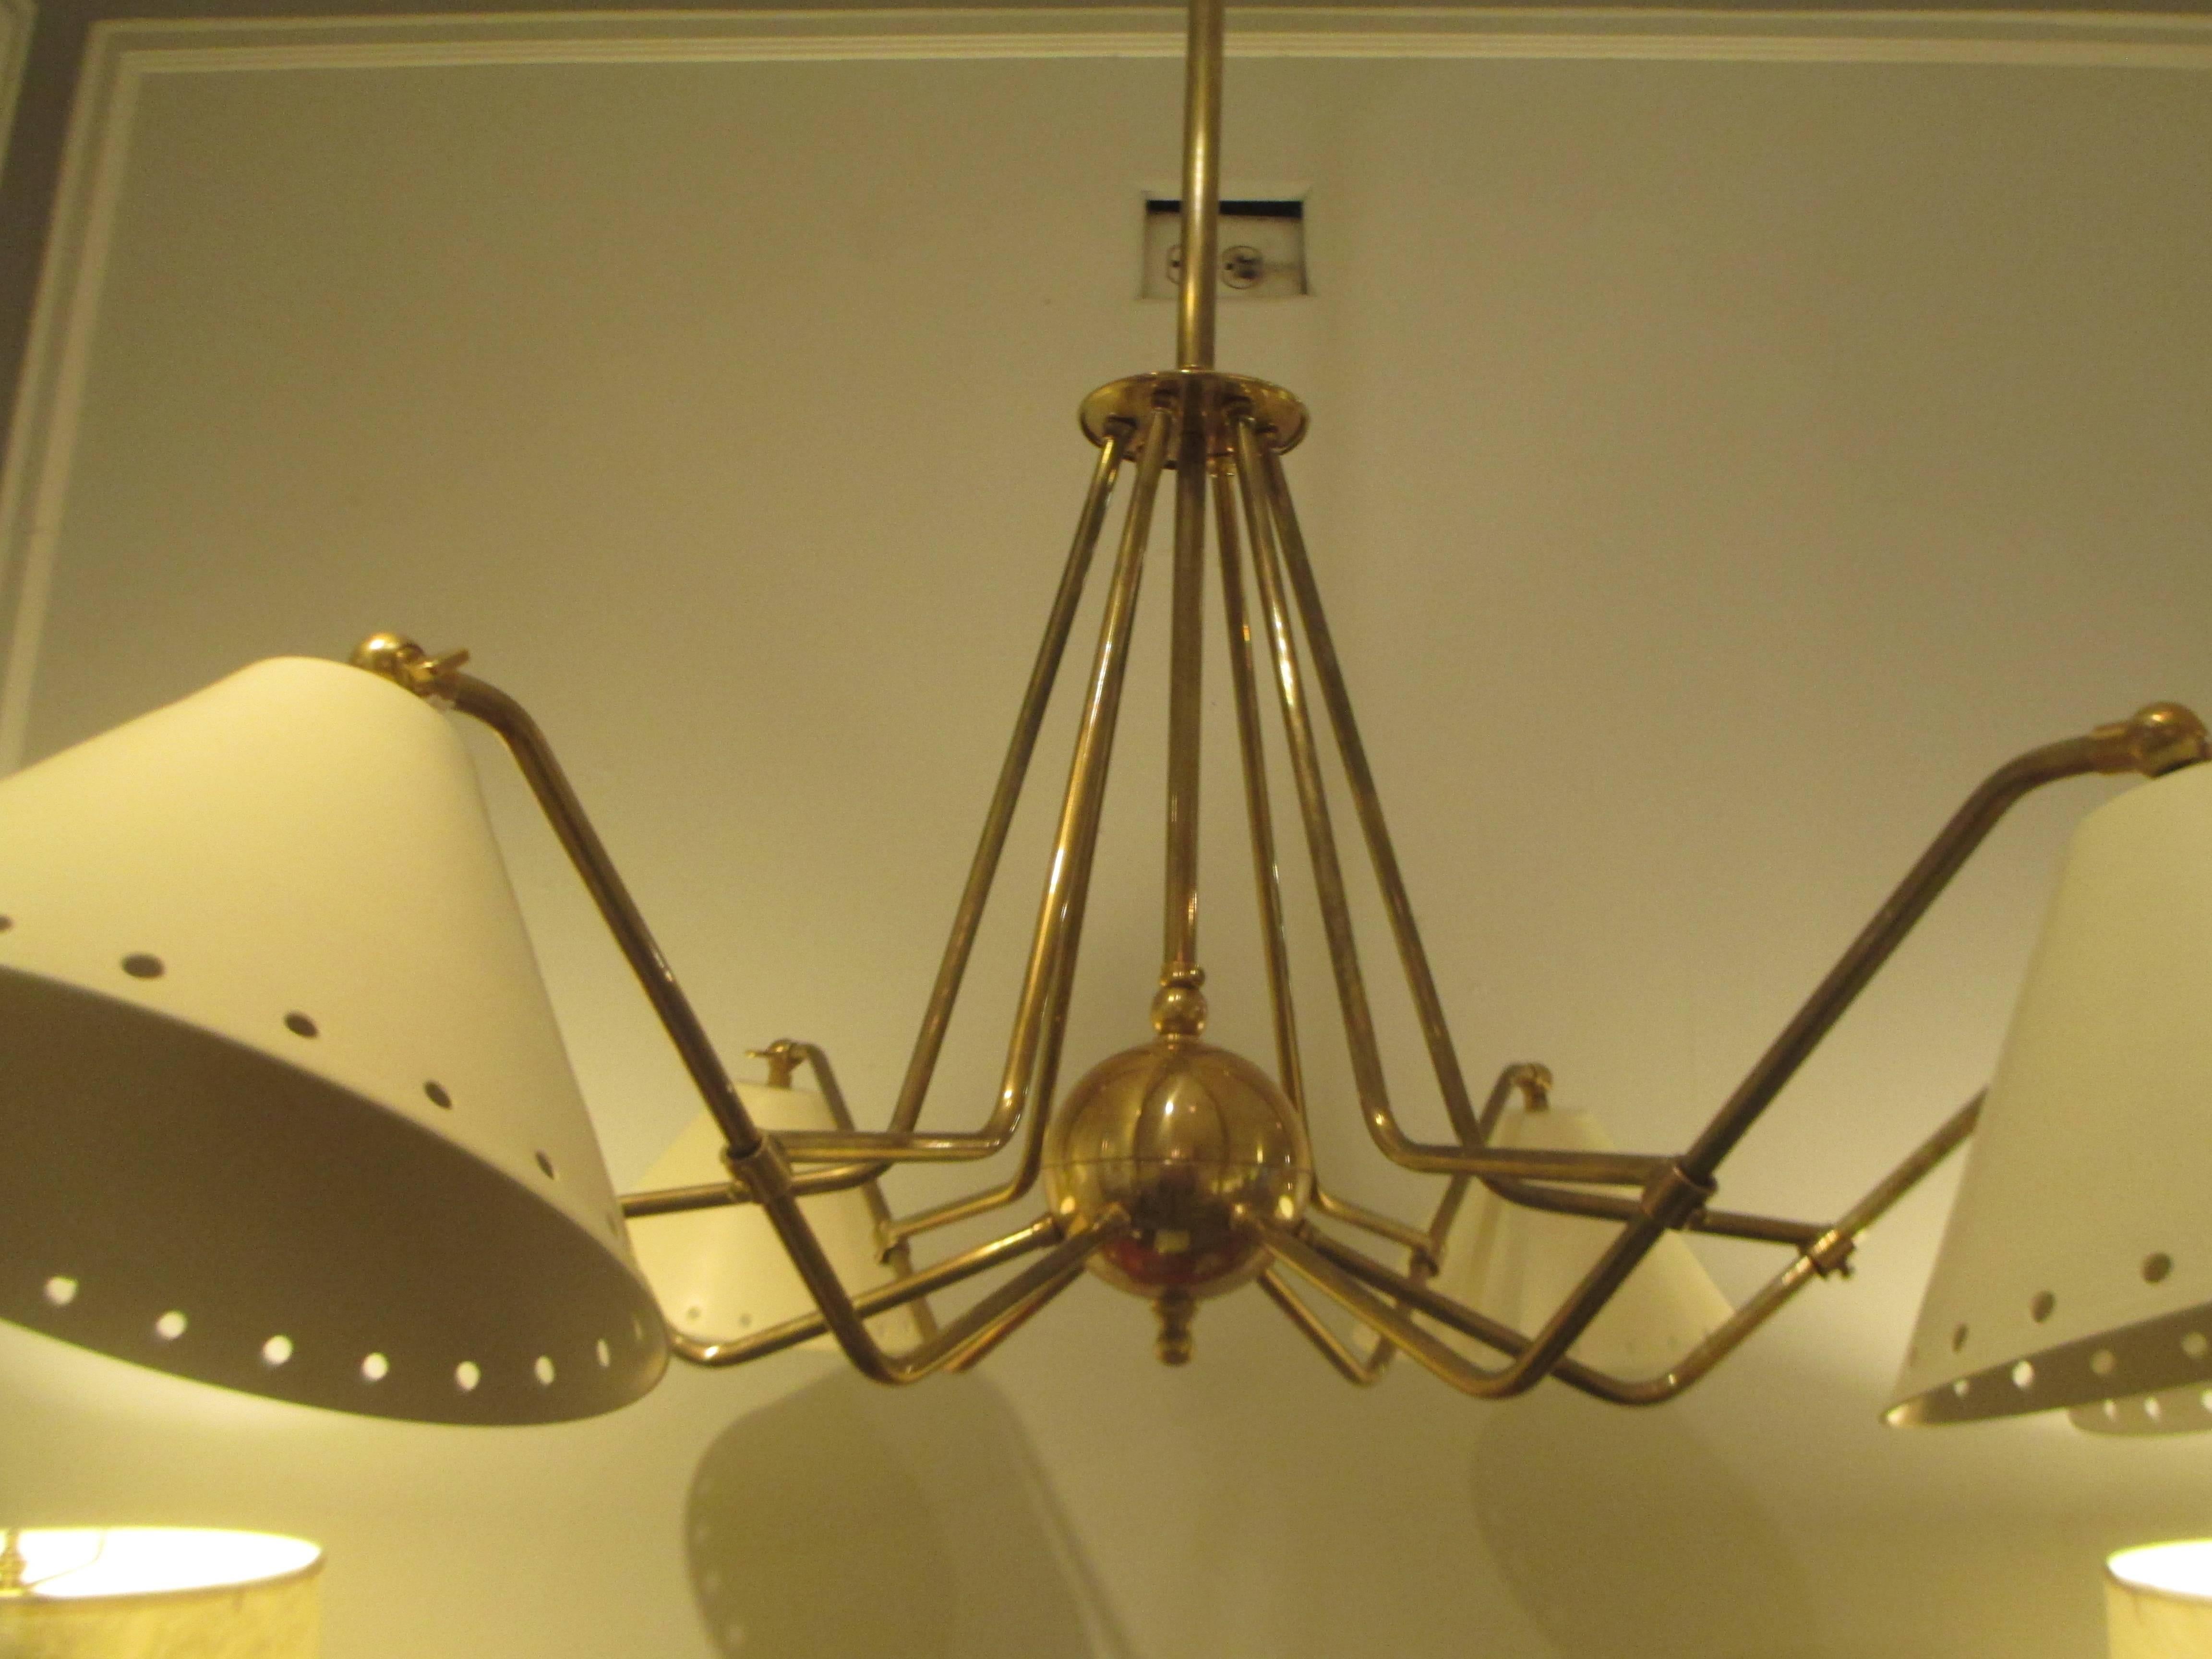 Custom six-light brass and tole fixture in the midcentury manner.
Lead time for custom made is 8-10 weeks.